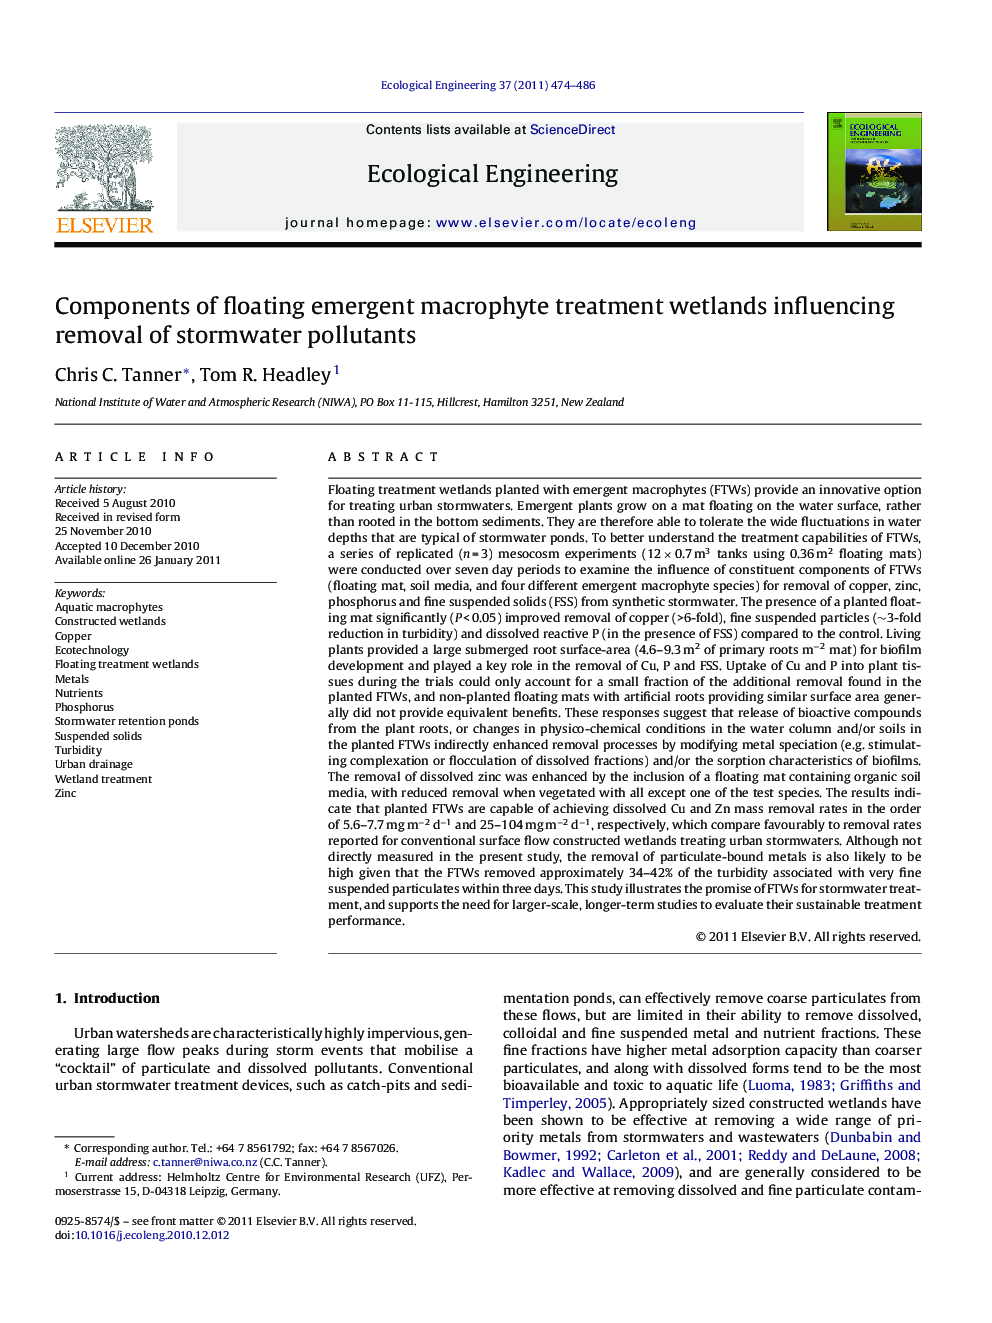 Components of floating emergent macrophyte treatment wetlands influencing removal of stormwater pollutants